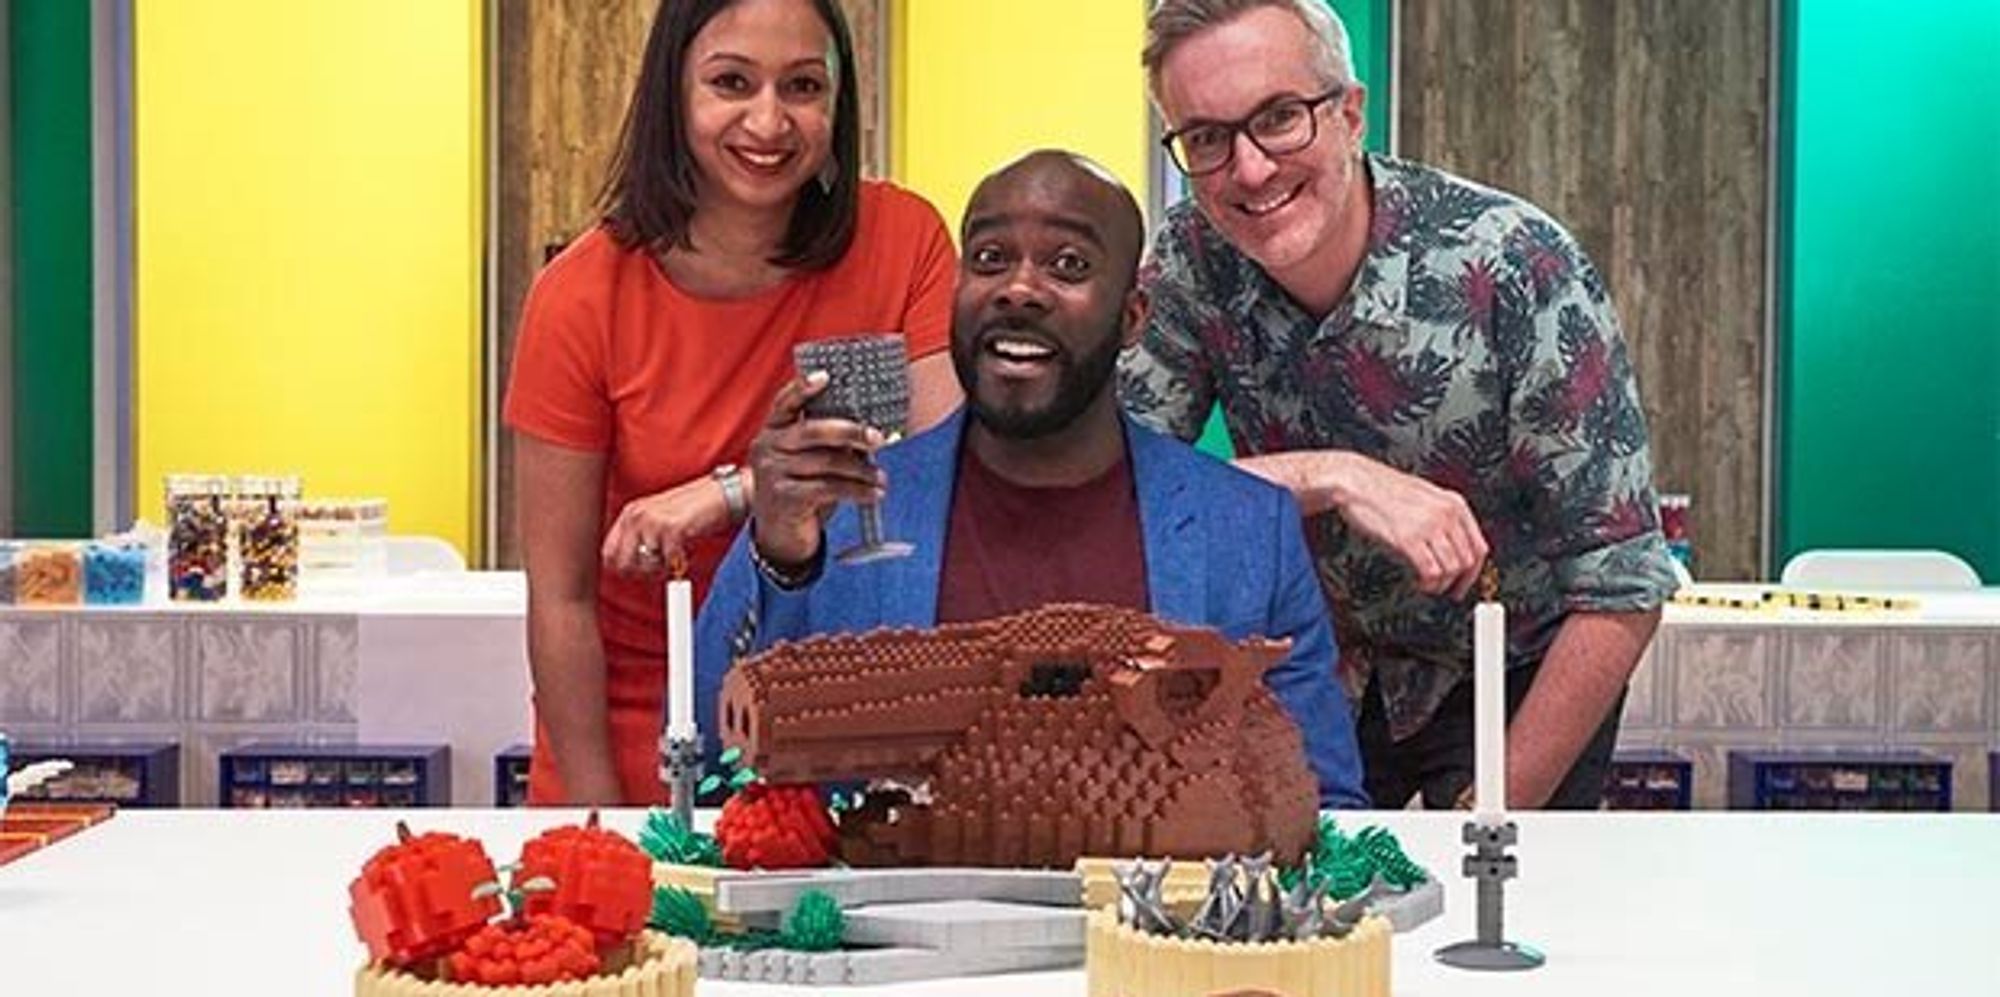 ‘LEGO Masters’ Is Set To Do For LEGO What ‘Great British Bake Off’ Did For ...2000 x 997